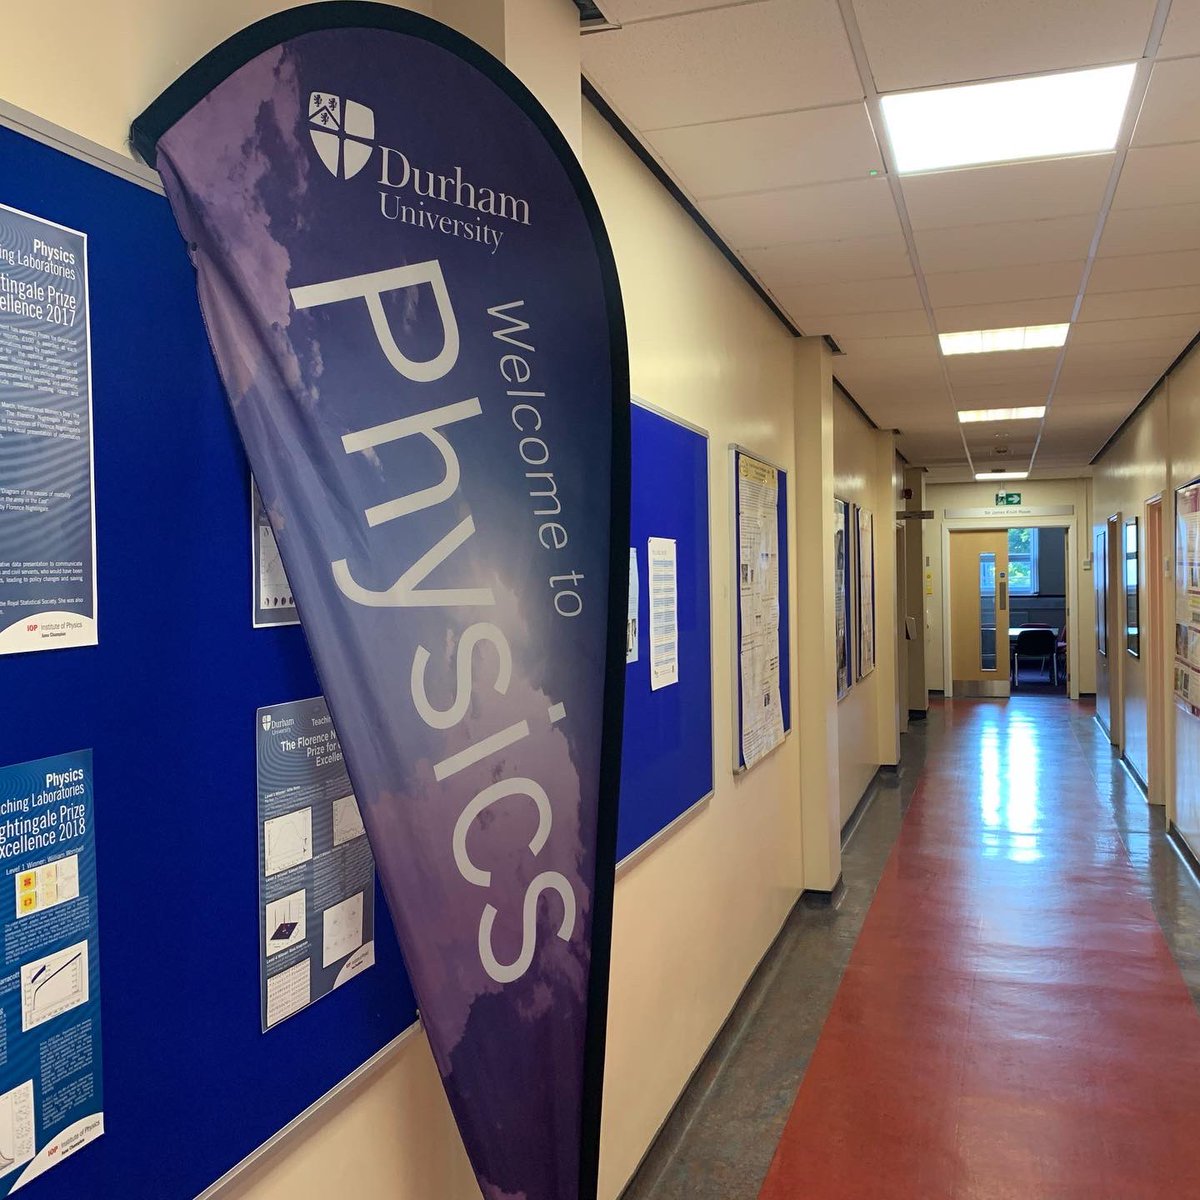 Thinking of studying Physics at Durham? Come to the department today to our #openday you can find out more information about Physics and our colleges at Durham.ac.uk #durhamuniversity #physics #physicsiscool